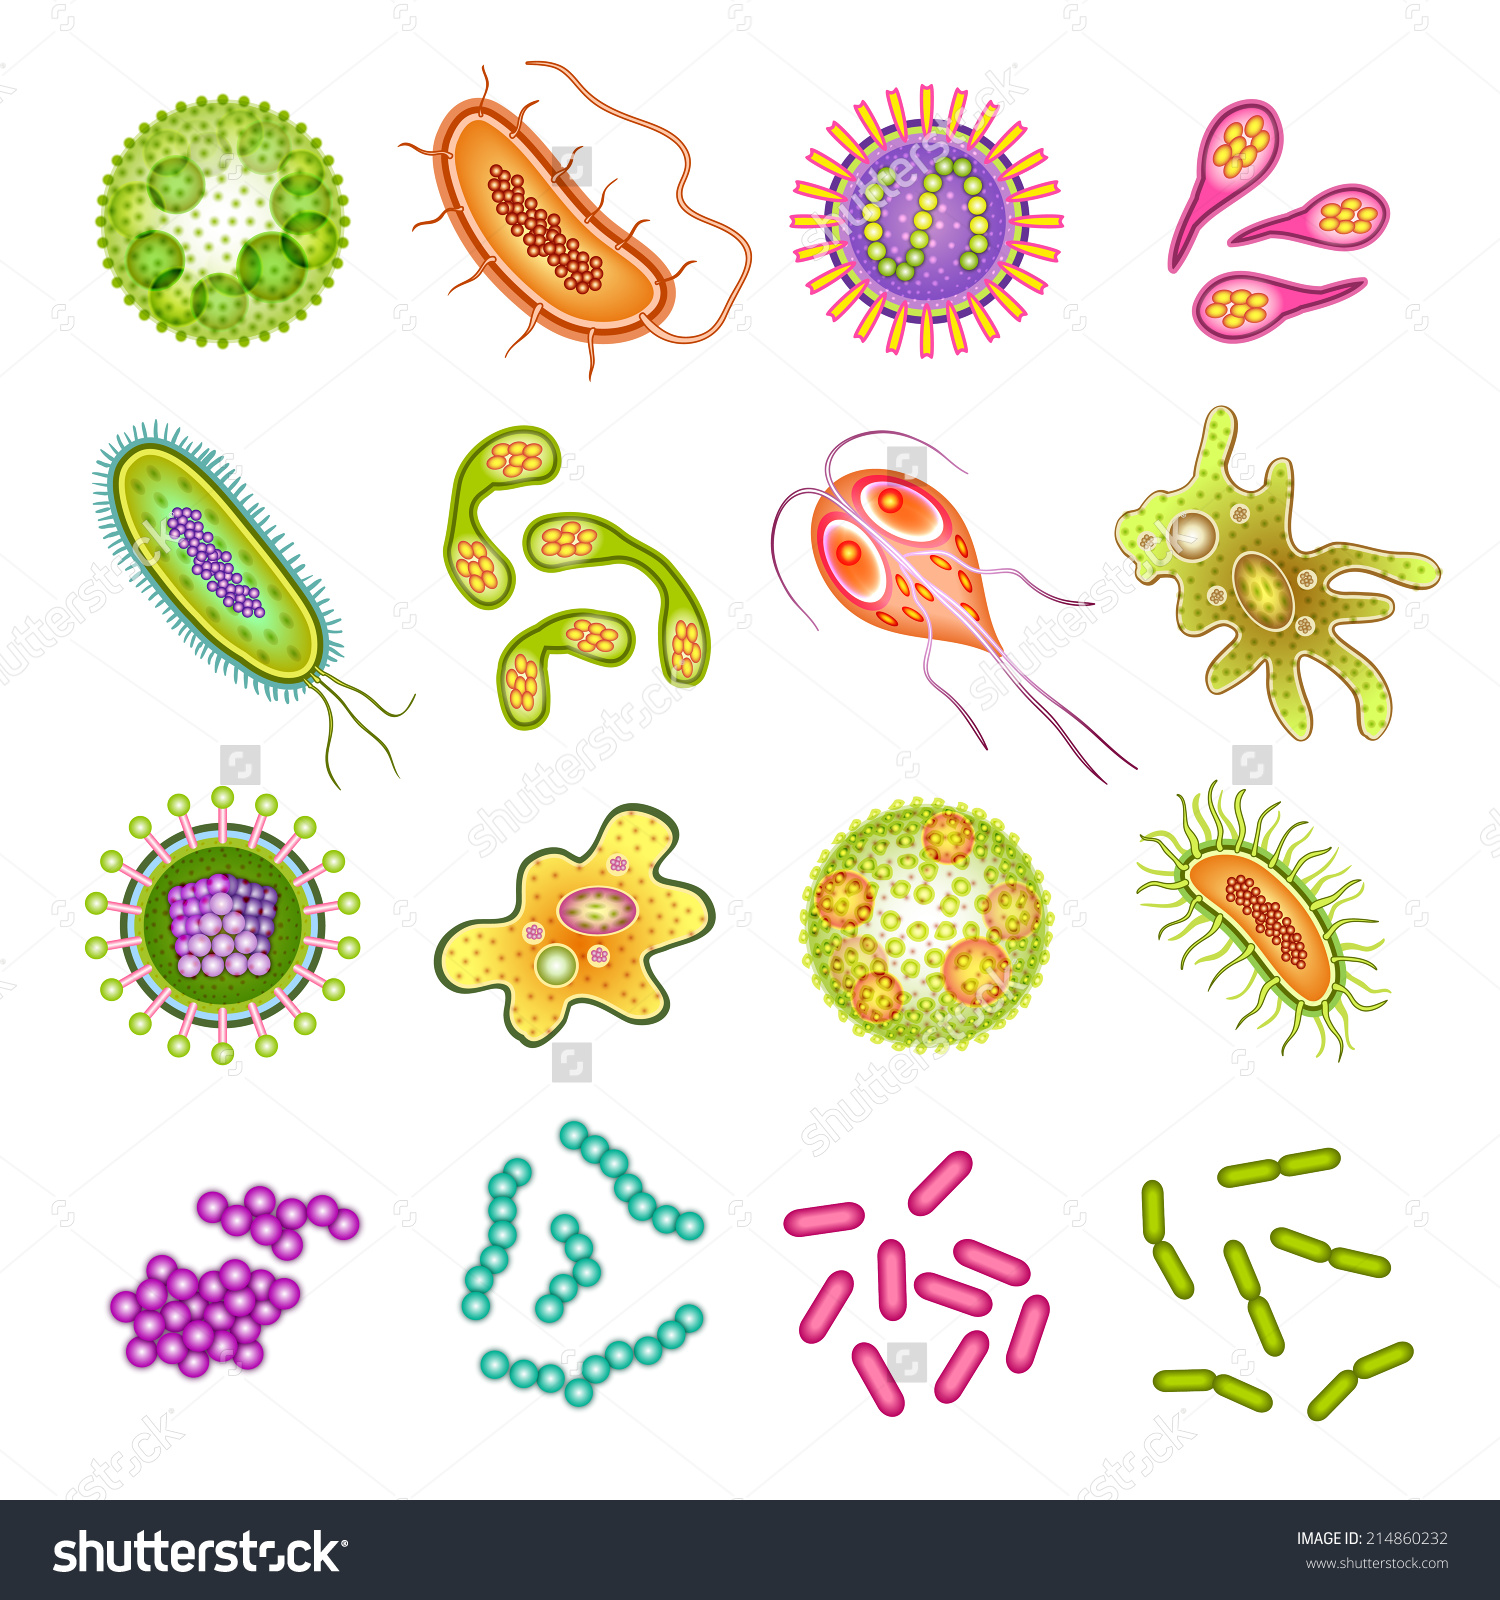 Pictures Of Germs And Viruses 52